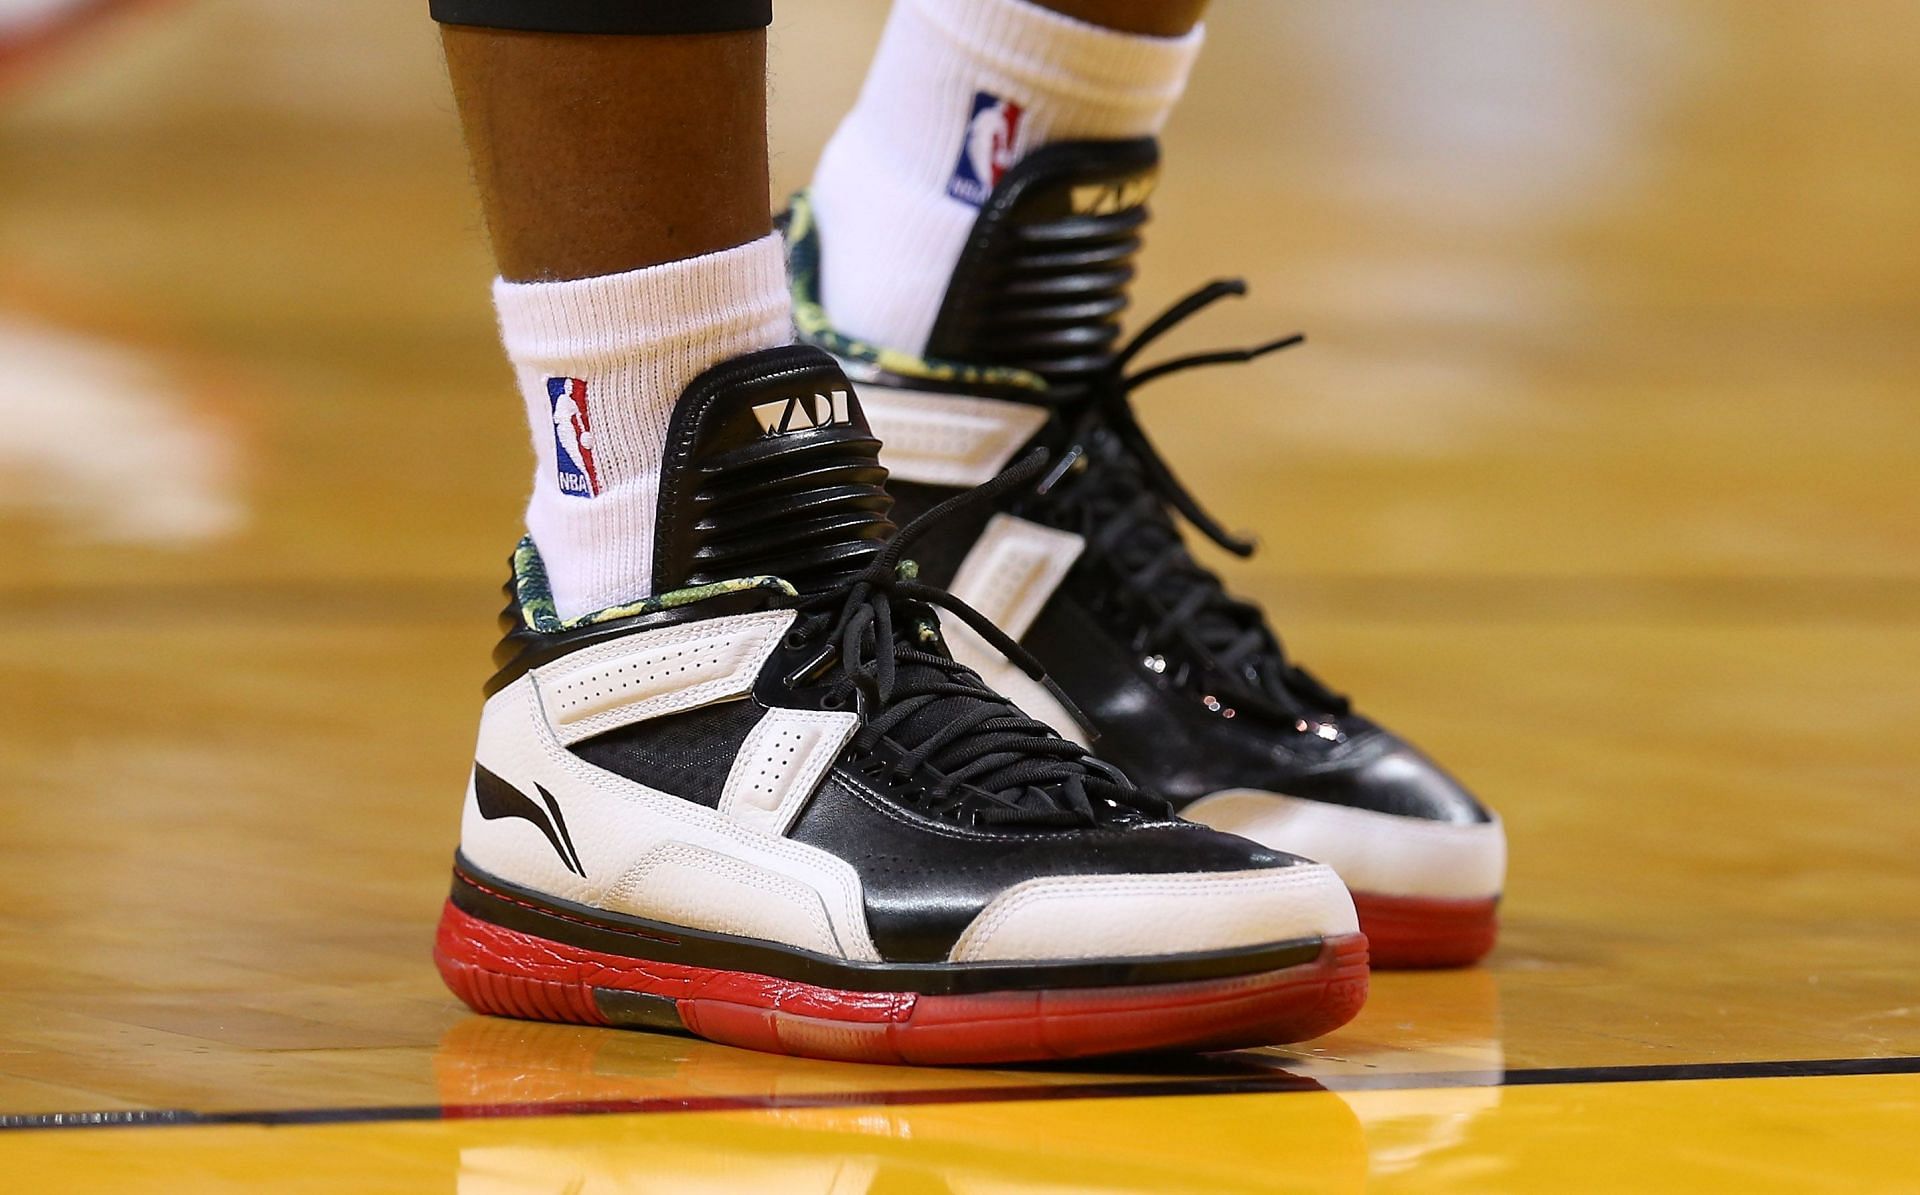 Wade has achieved a lot of success with his Li-Ning shoes.